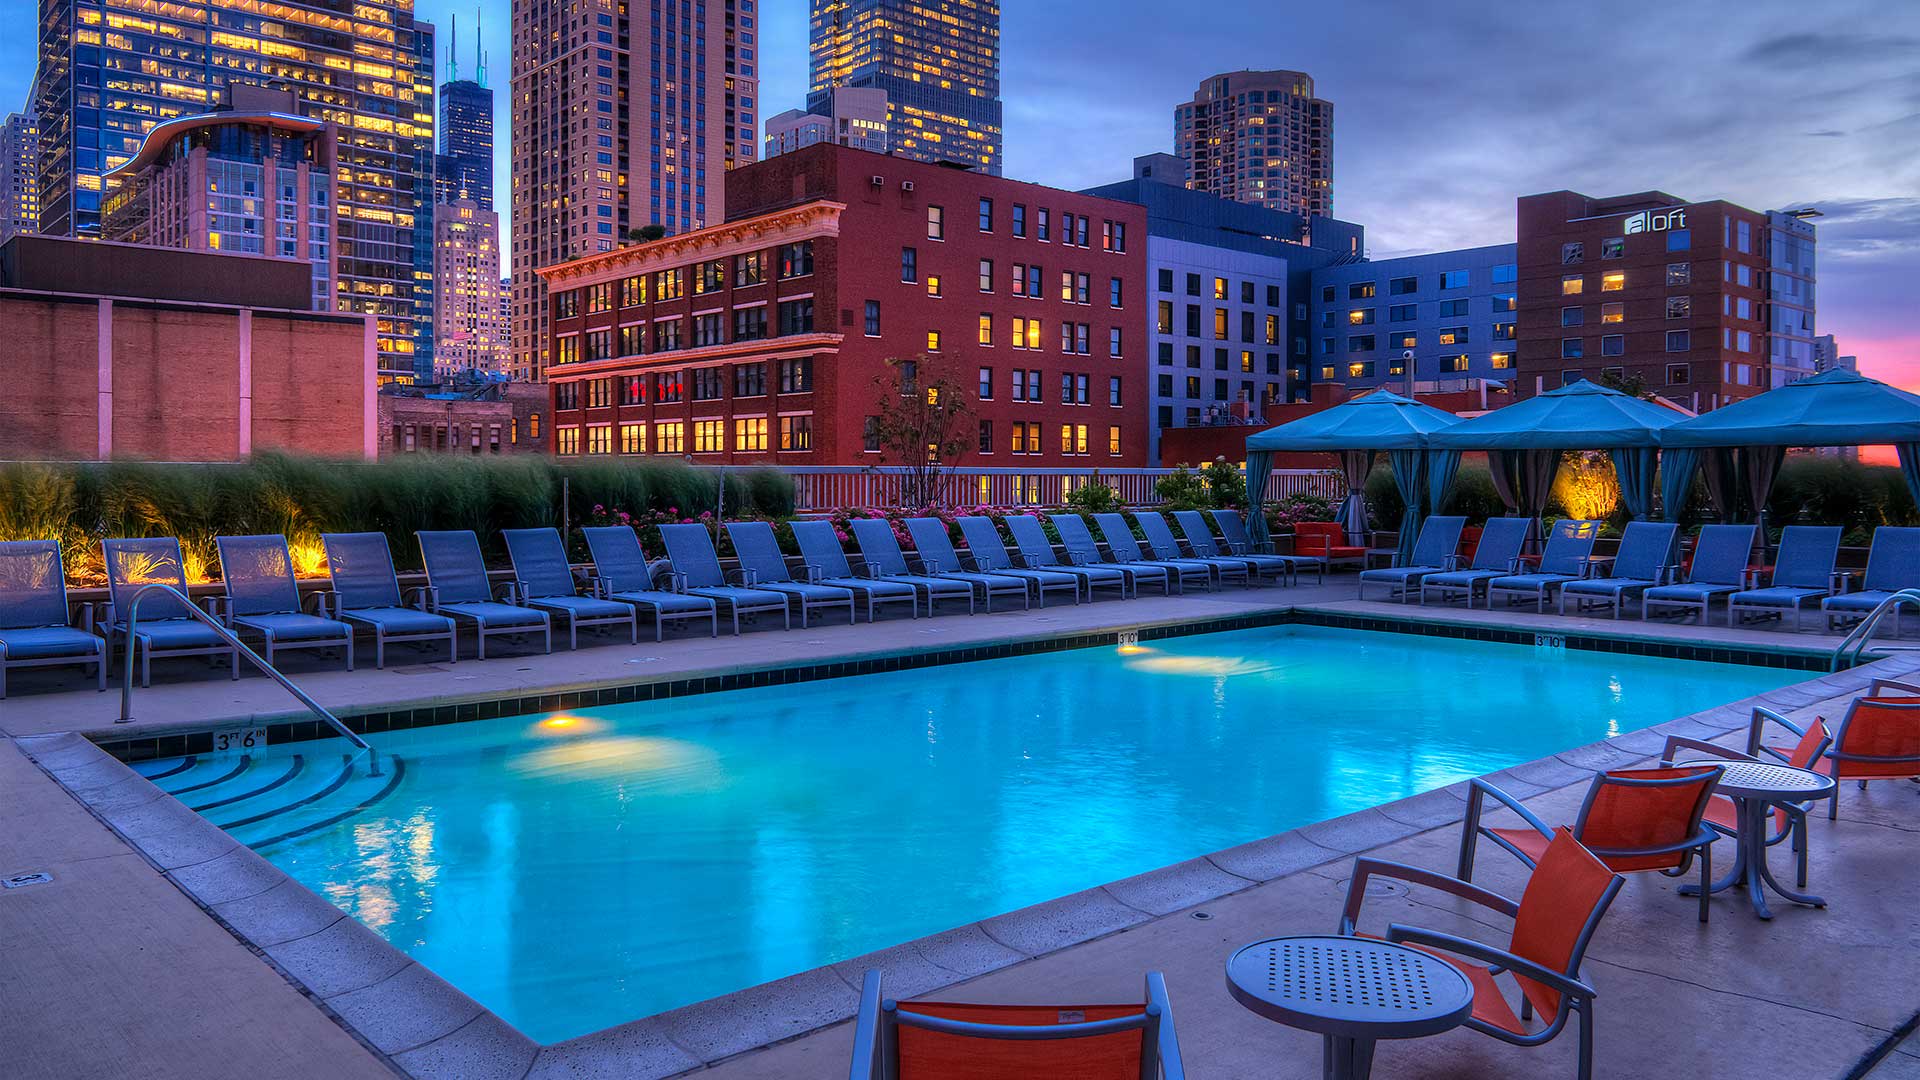 Looking across the outdoor pool at Grand Plaza at night. The pool glows blue and has various lounge chairs around it. City buildings make up the background, lit up at night.